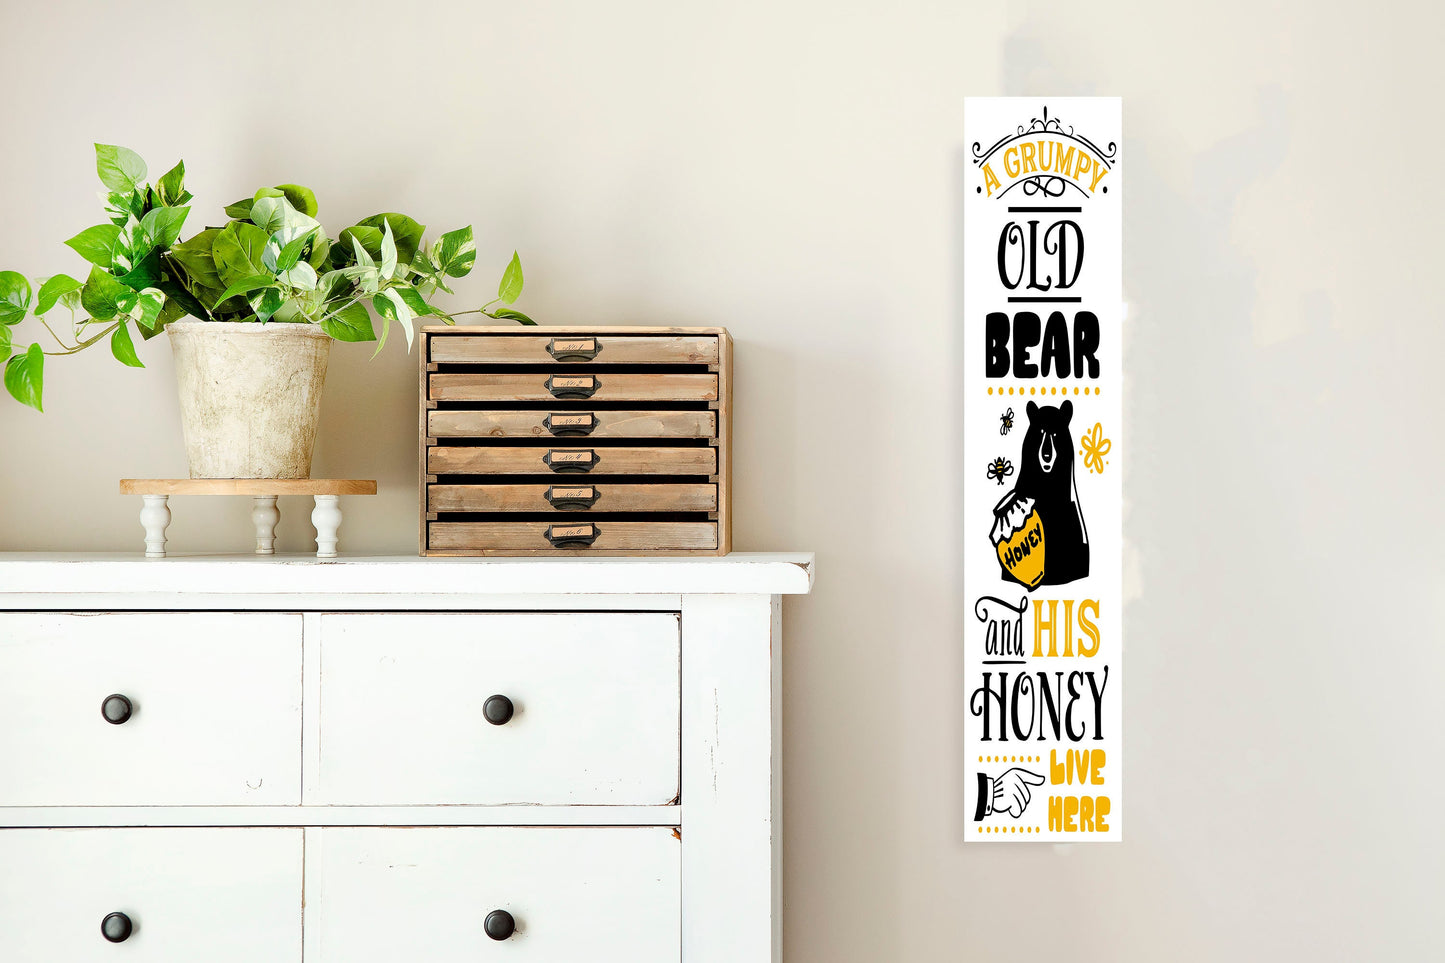 24 Inch (2 Foot Tall) Grumpy Old Bear and His Honey Live Here Vertical Wood Print Sign